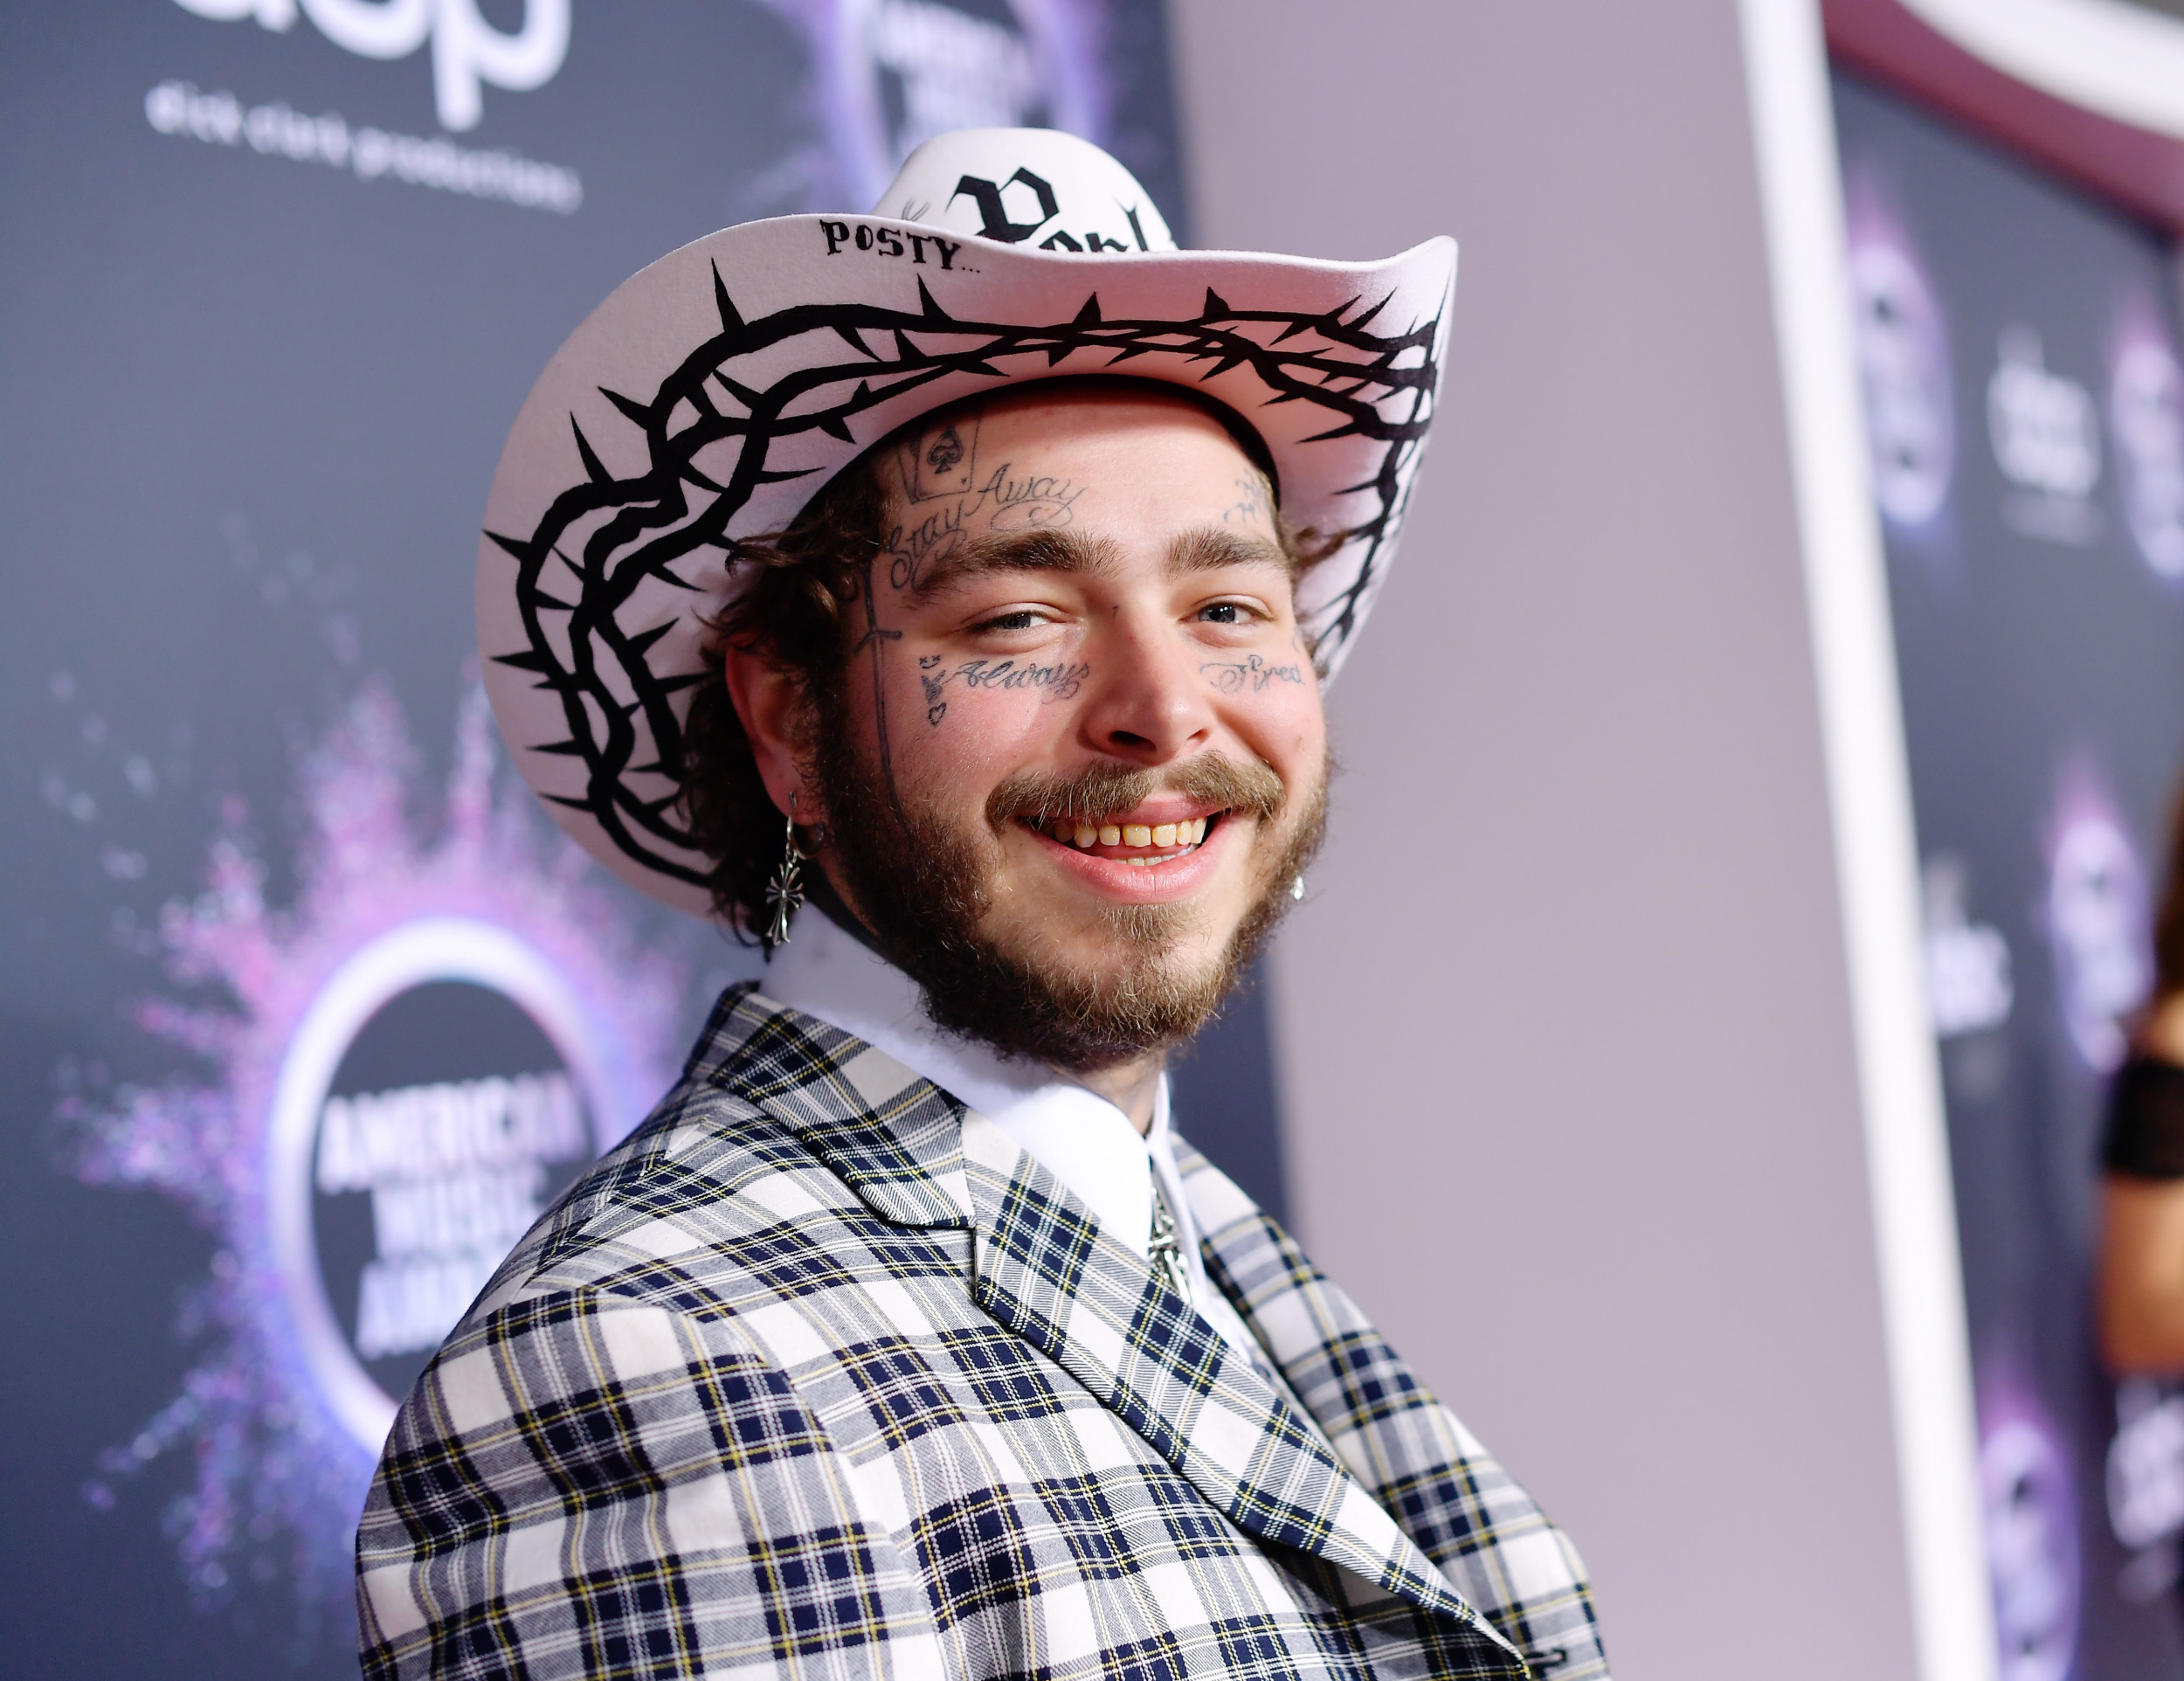 Post Malone Tells Fans 'Everything's Good' After Fall, Will Continue Tour